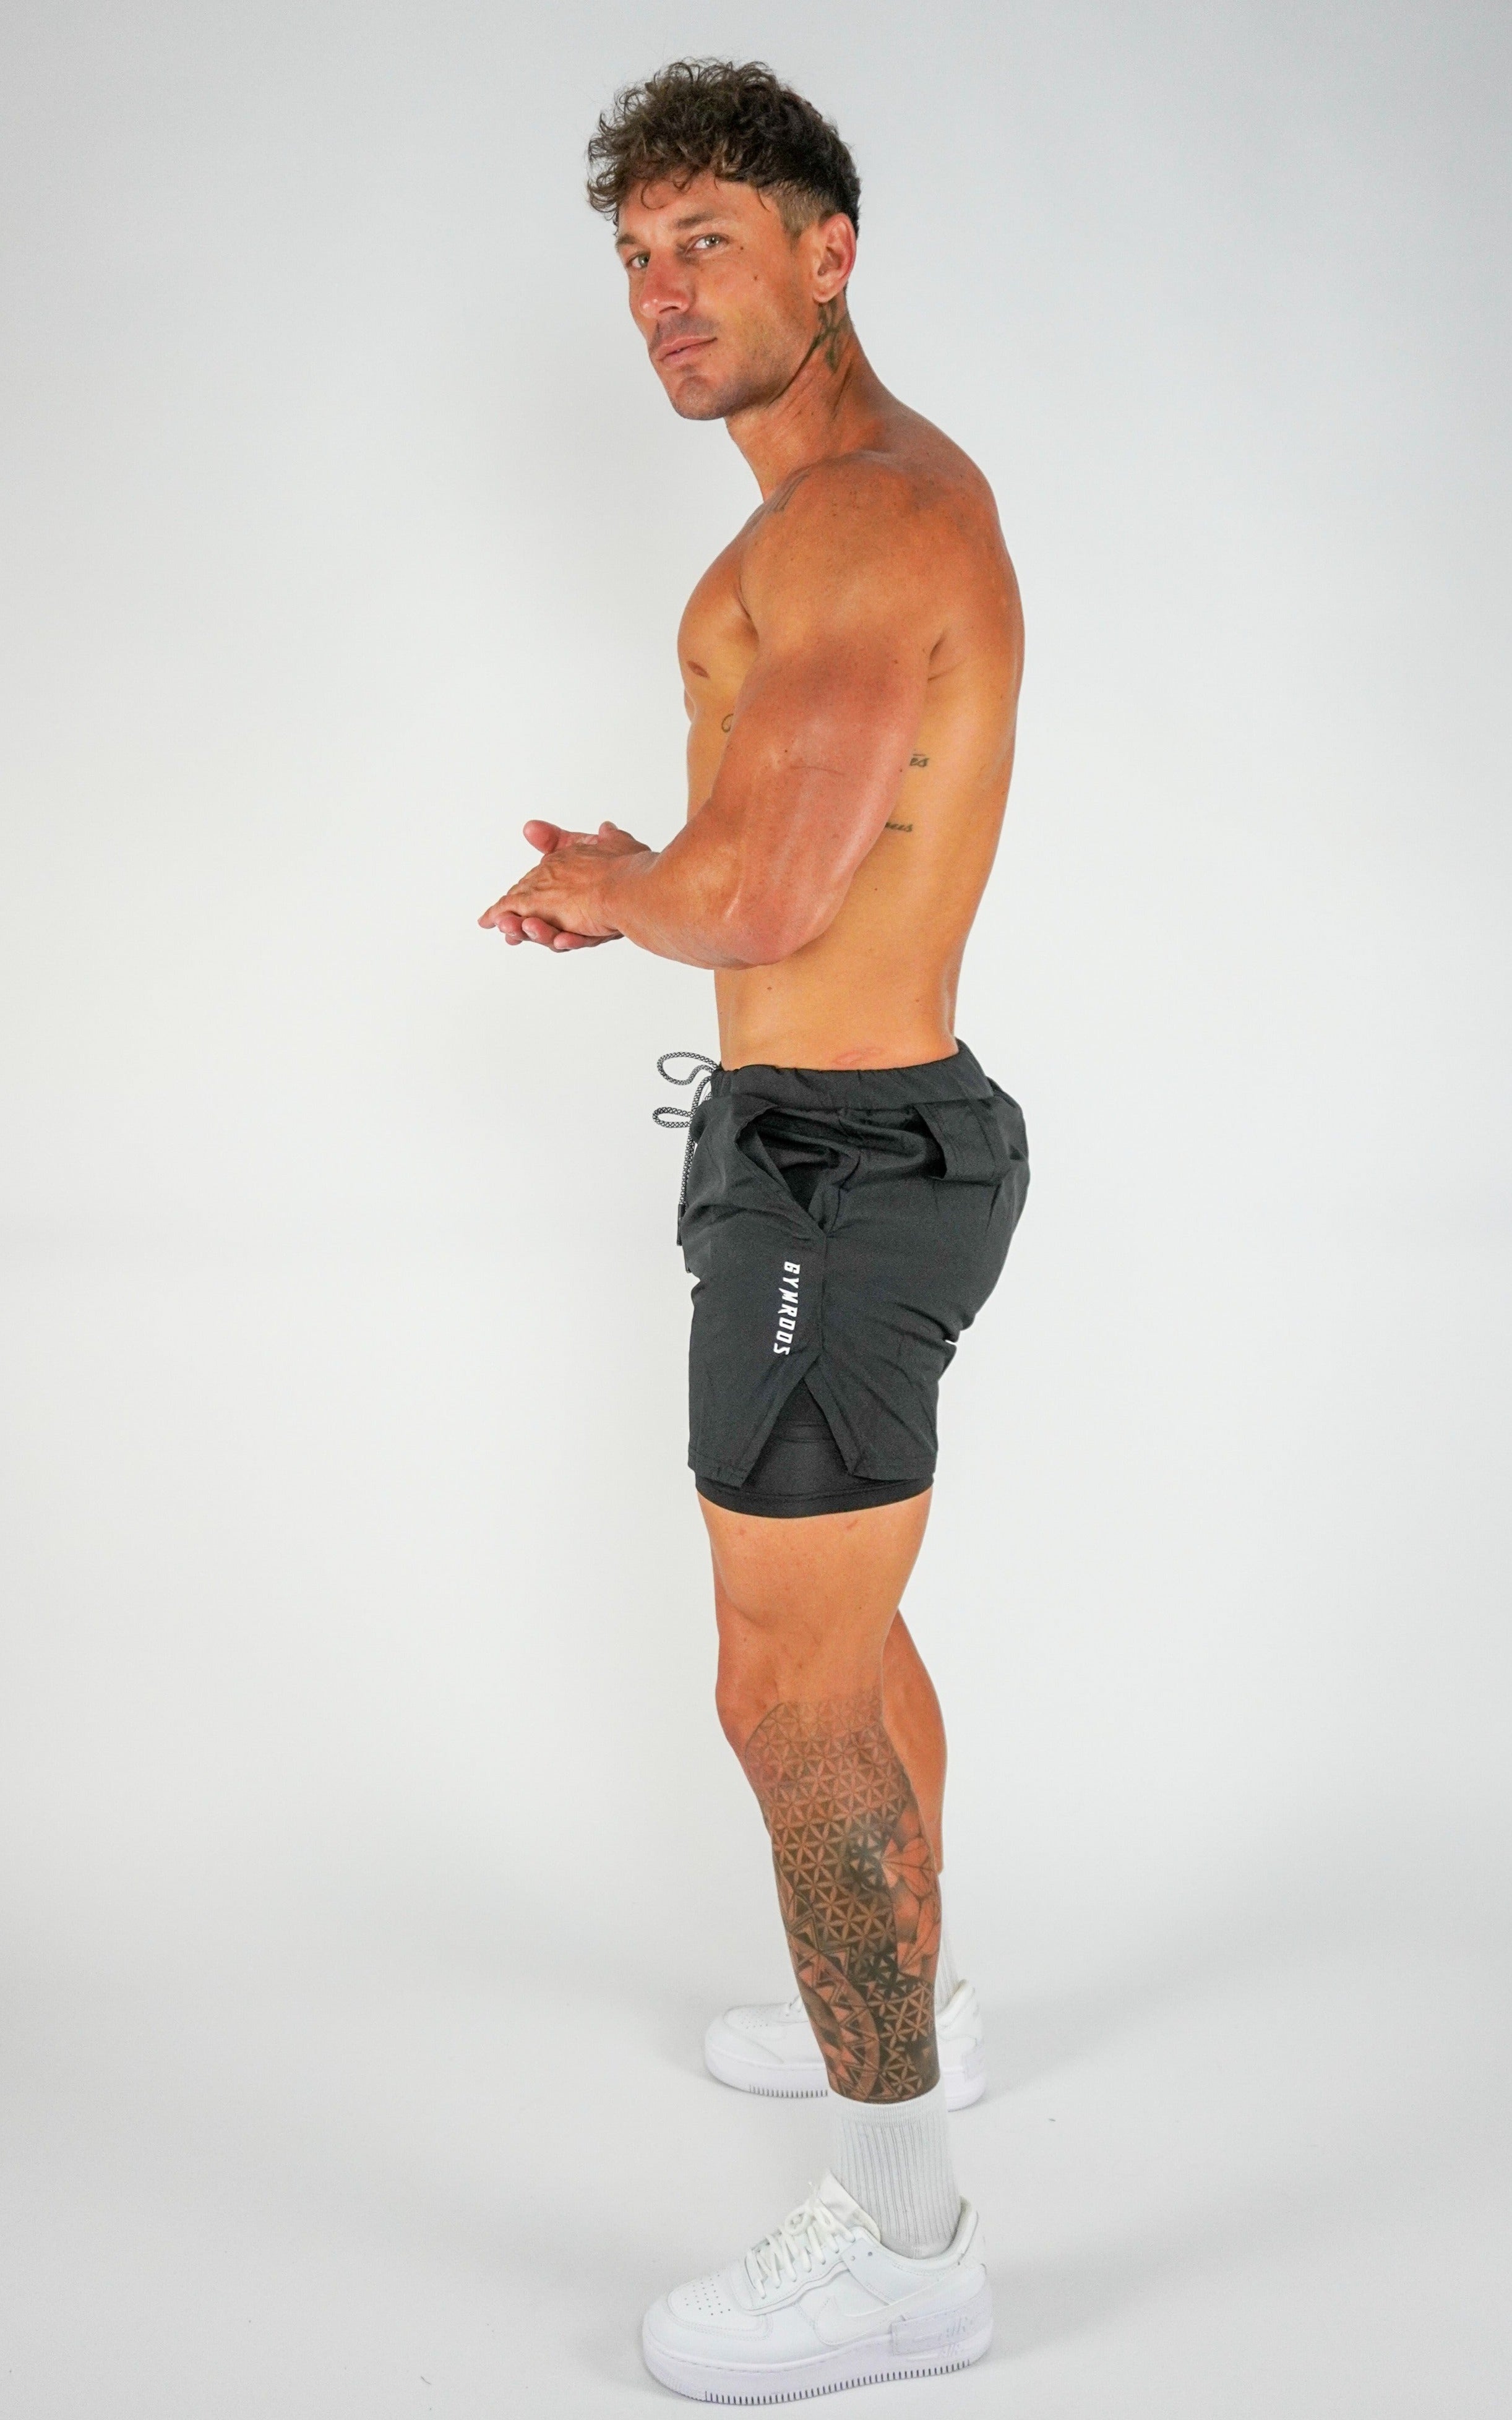 Culture 2-IN-1 Shorts - Black - GYMROOS